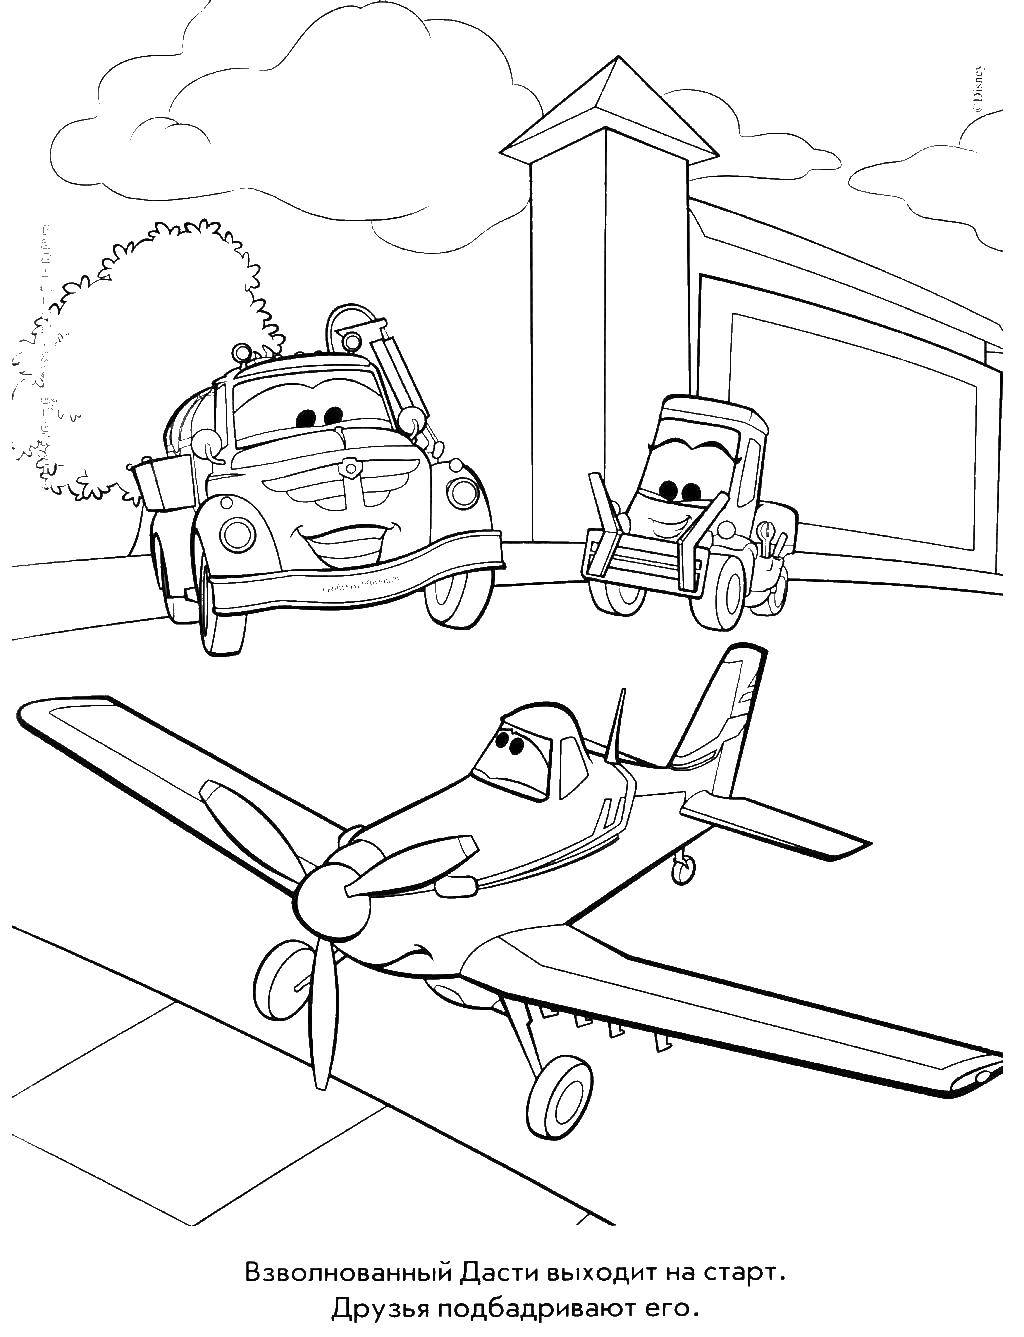 Coloring Dusty plane and his friends at the start. Category coloring. Tags:  The Plane, Dusty.